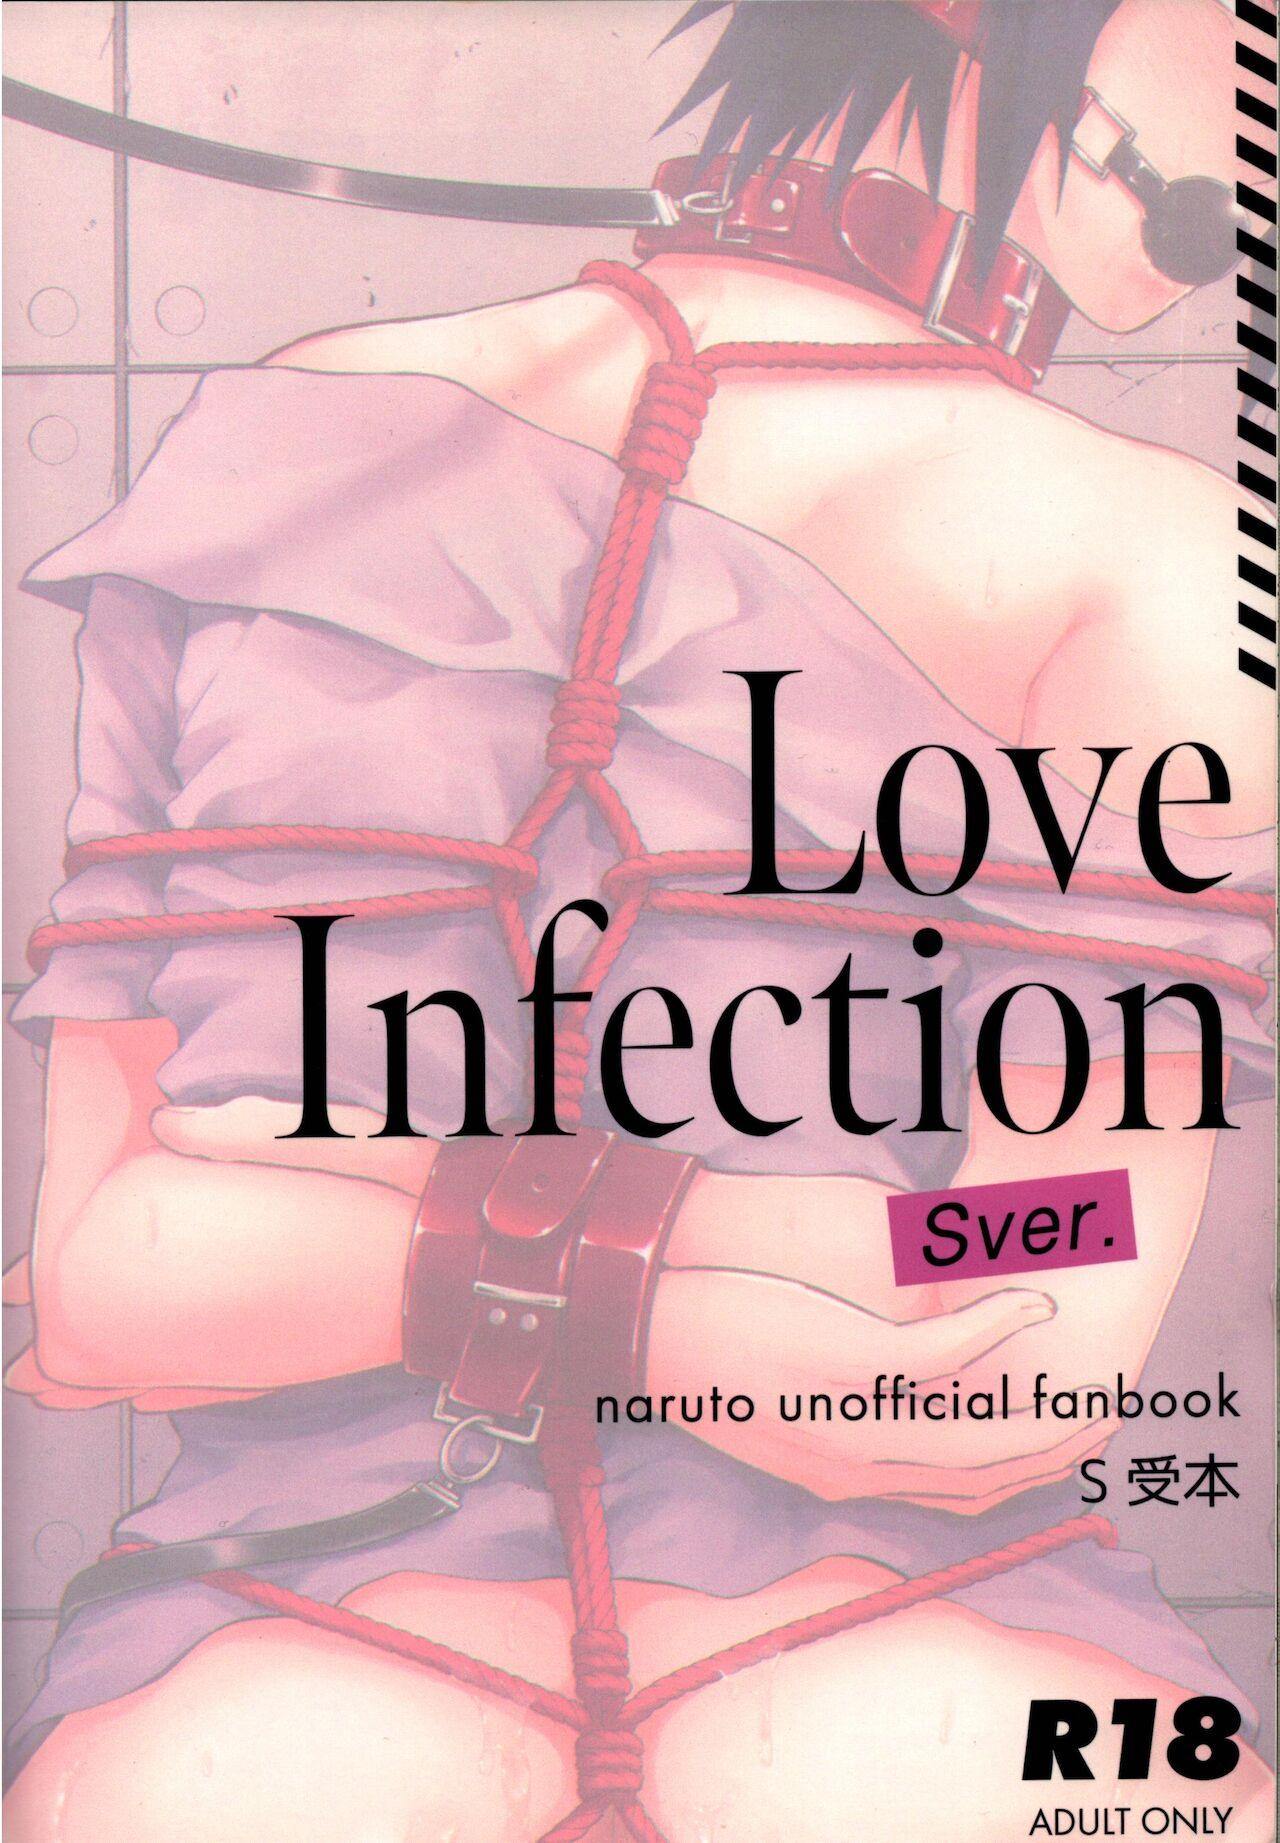 Love Infection Sver. 45